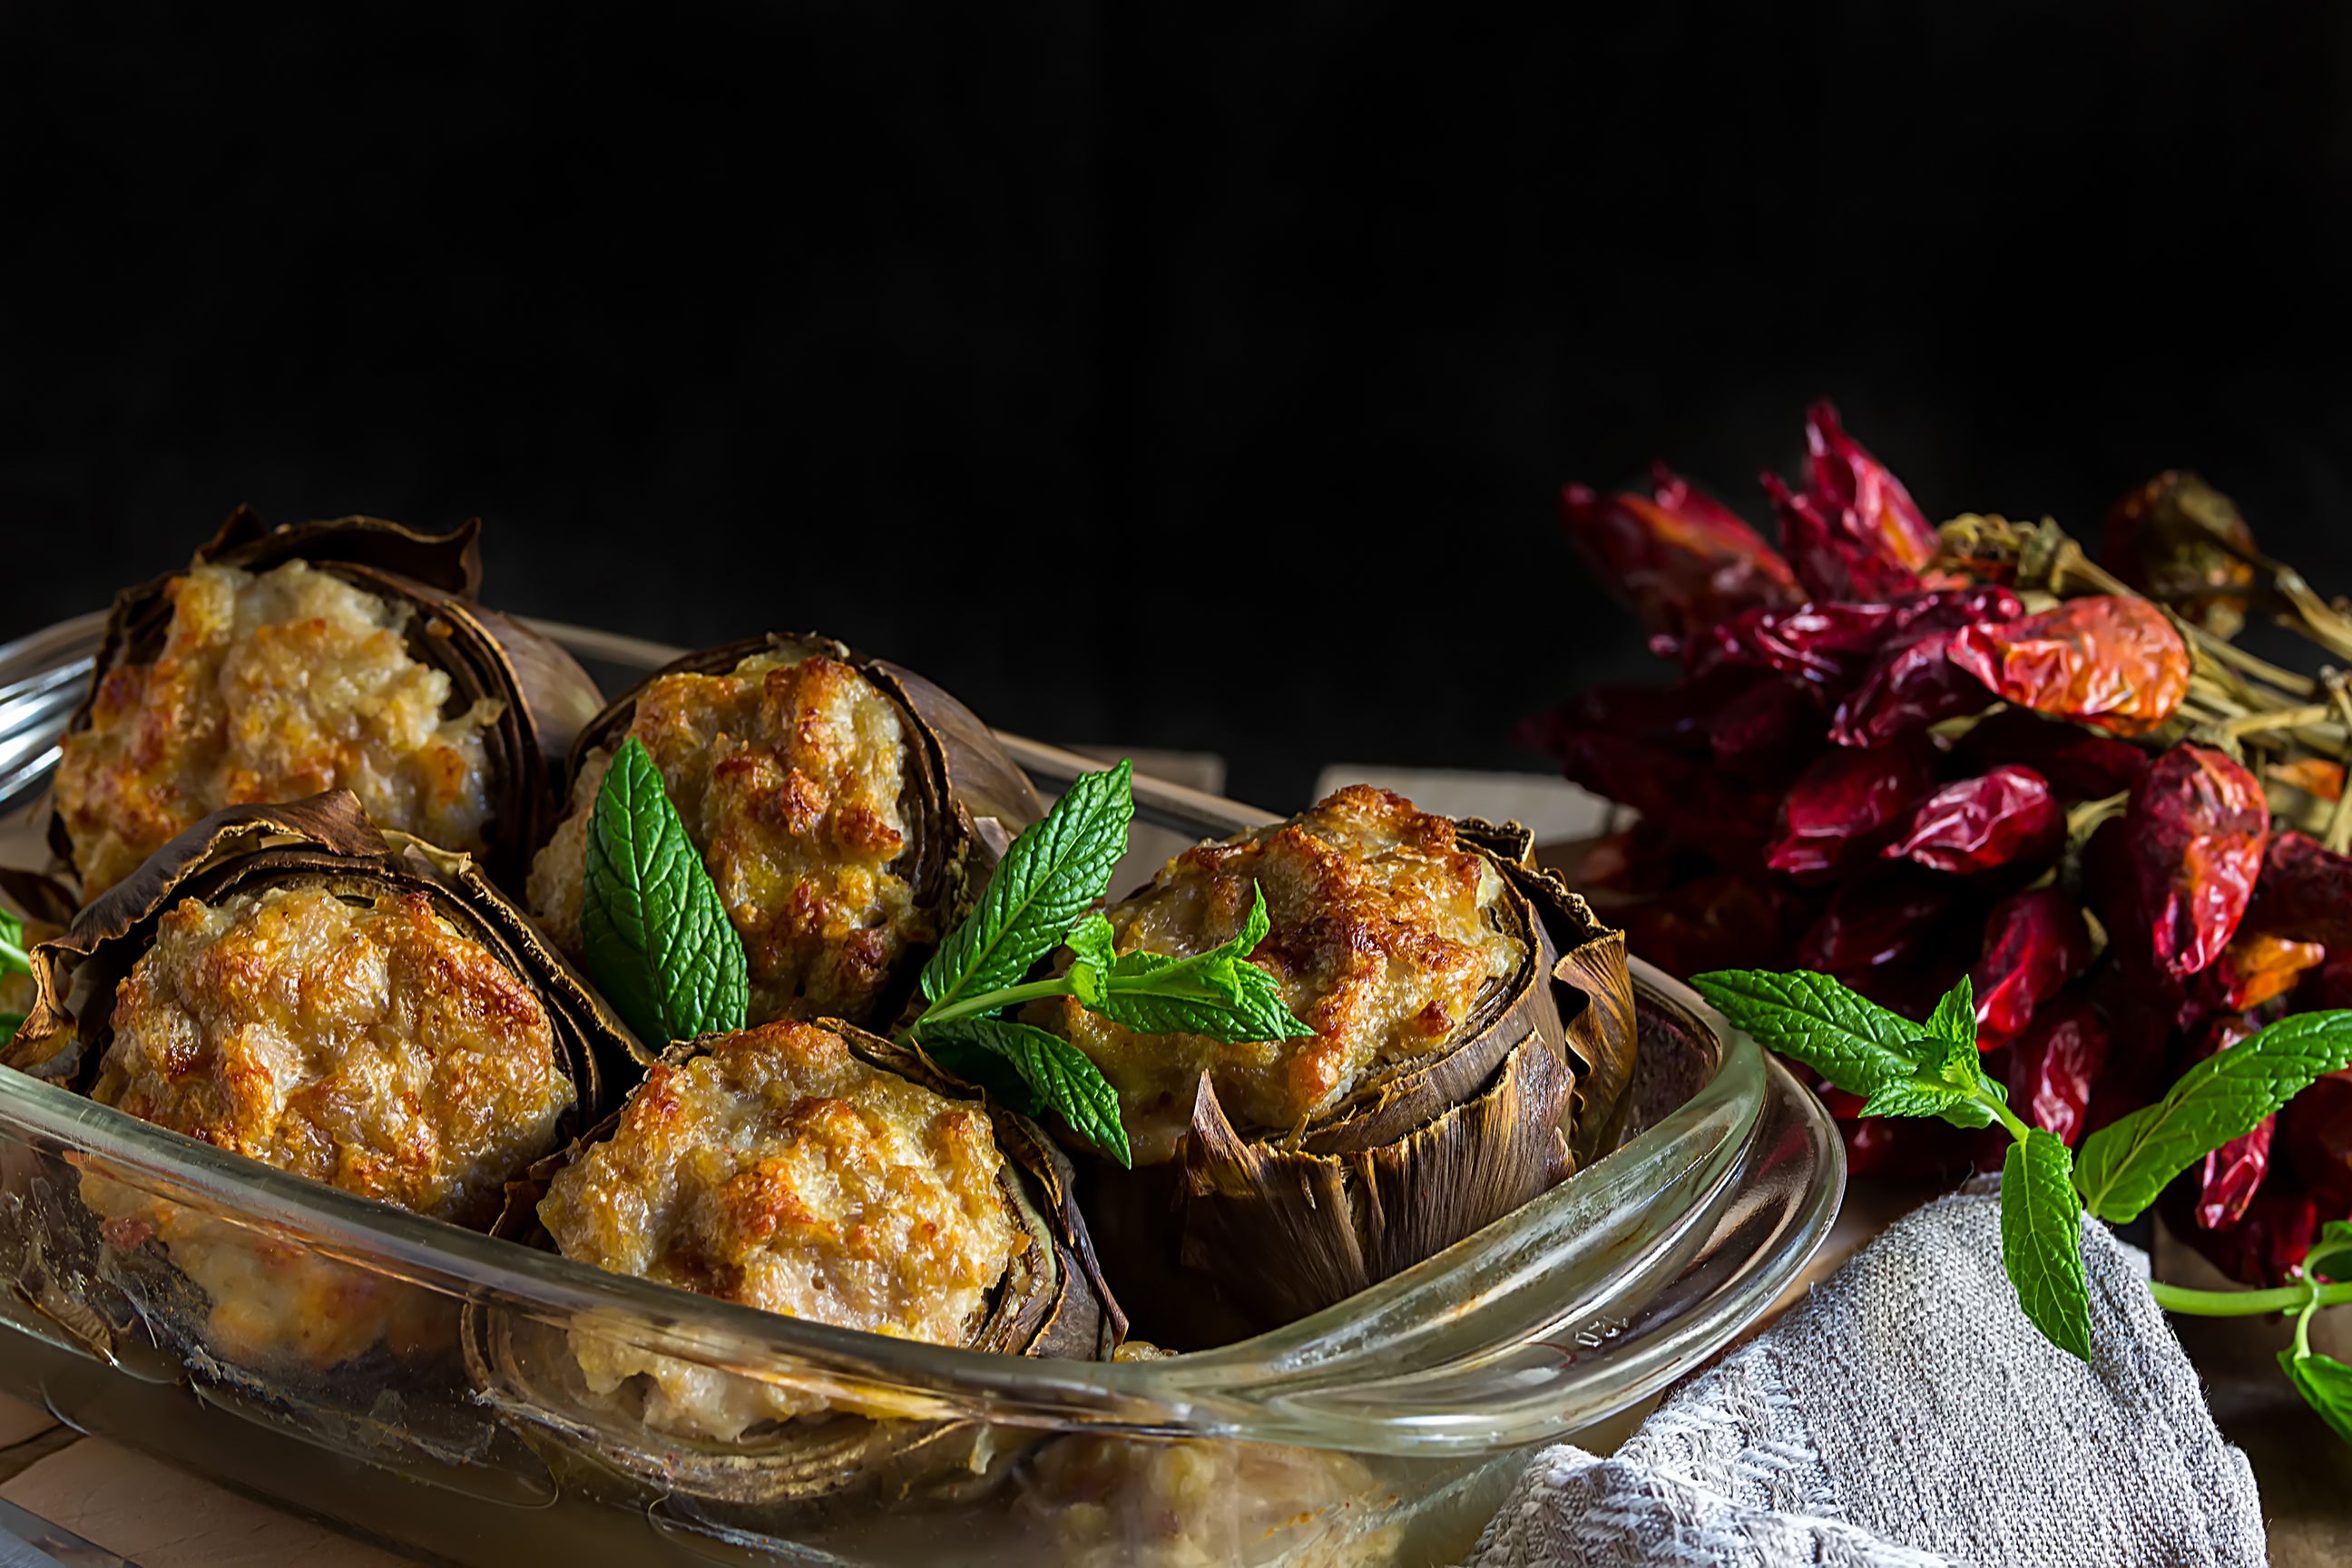 Grilled artichokes filled with a mixture of breadcrumbs, garlic, herbs, and cheese.